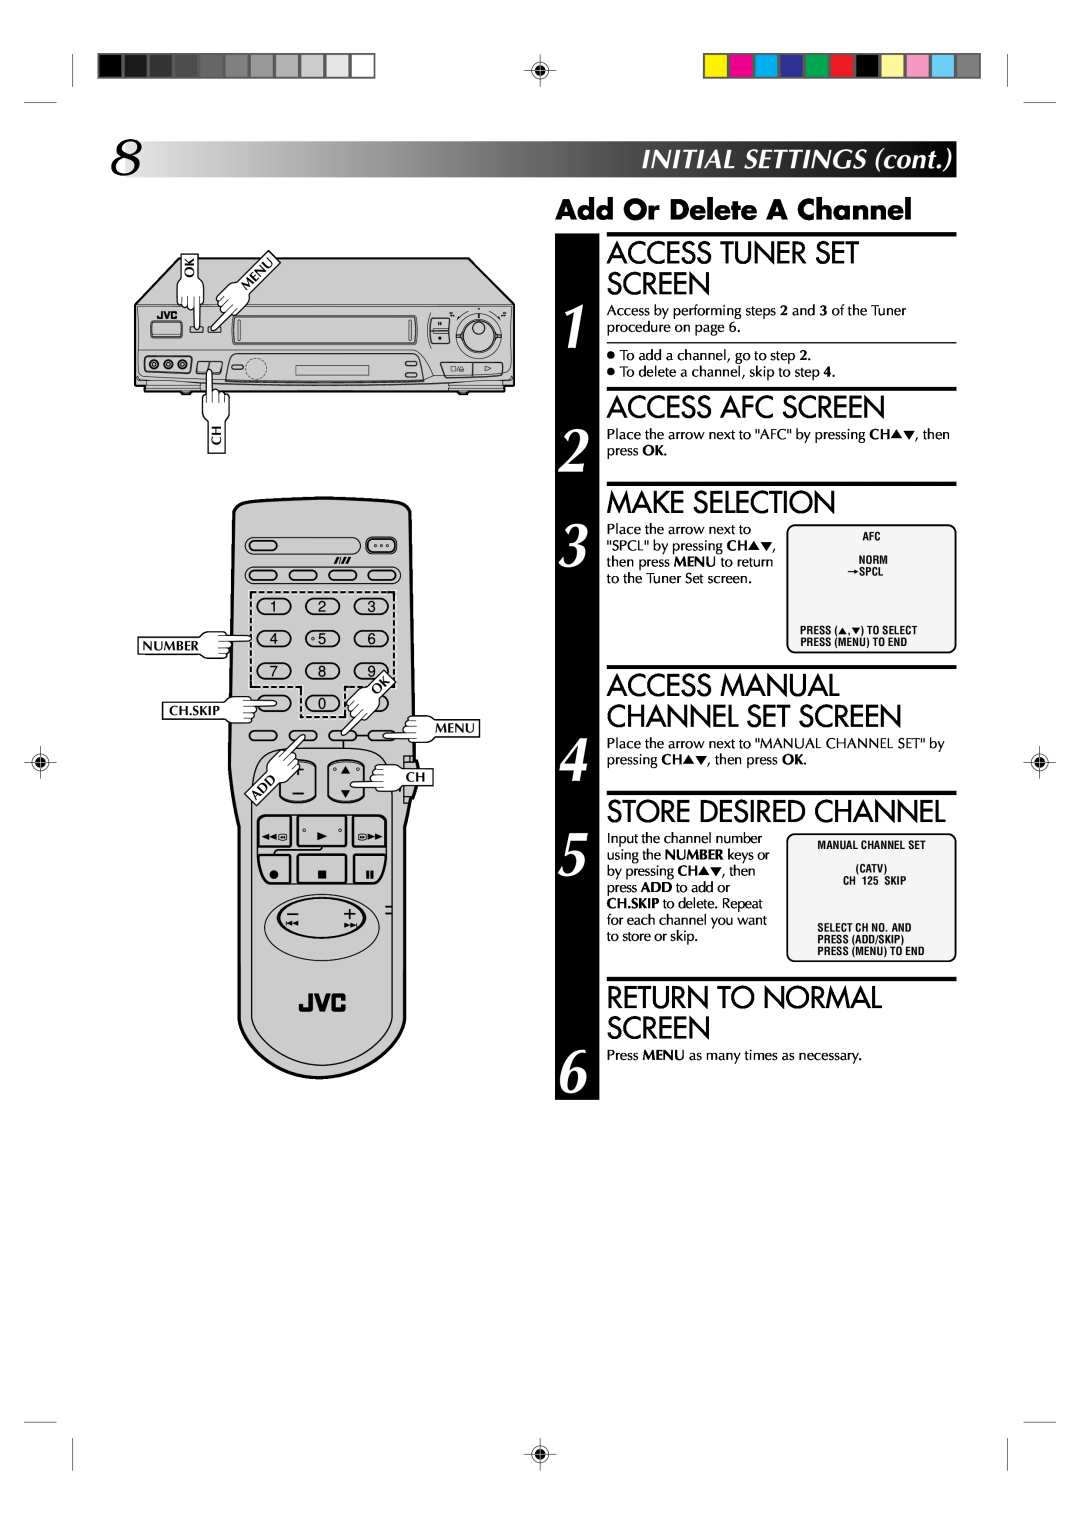 JVC HR-J631T Access Tuner Set Screen, Access Afc Screen, Store Desired Channel, Return To Normal Screen, Make Selection 